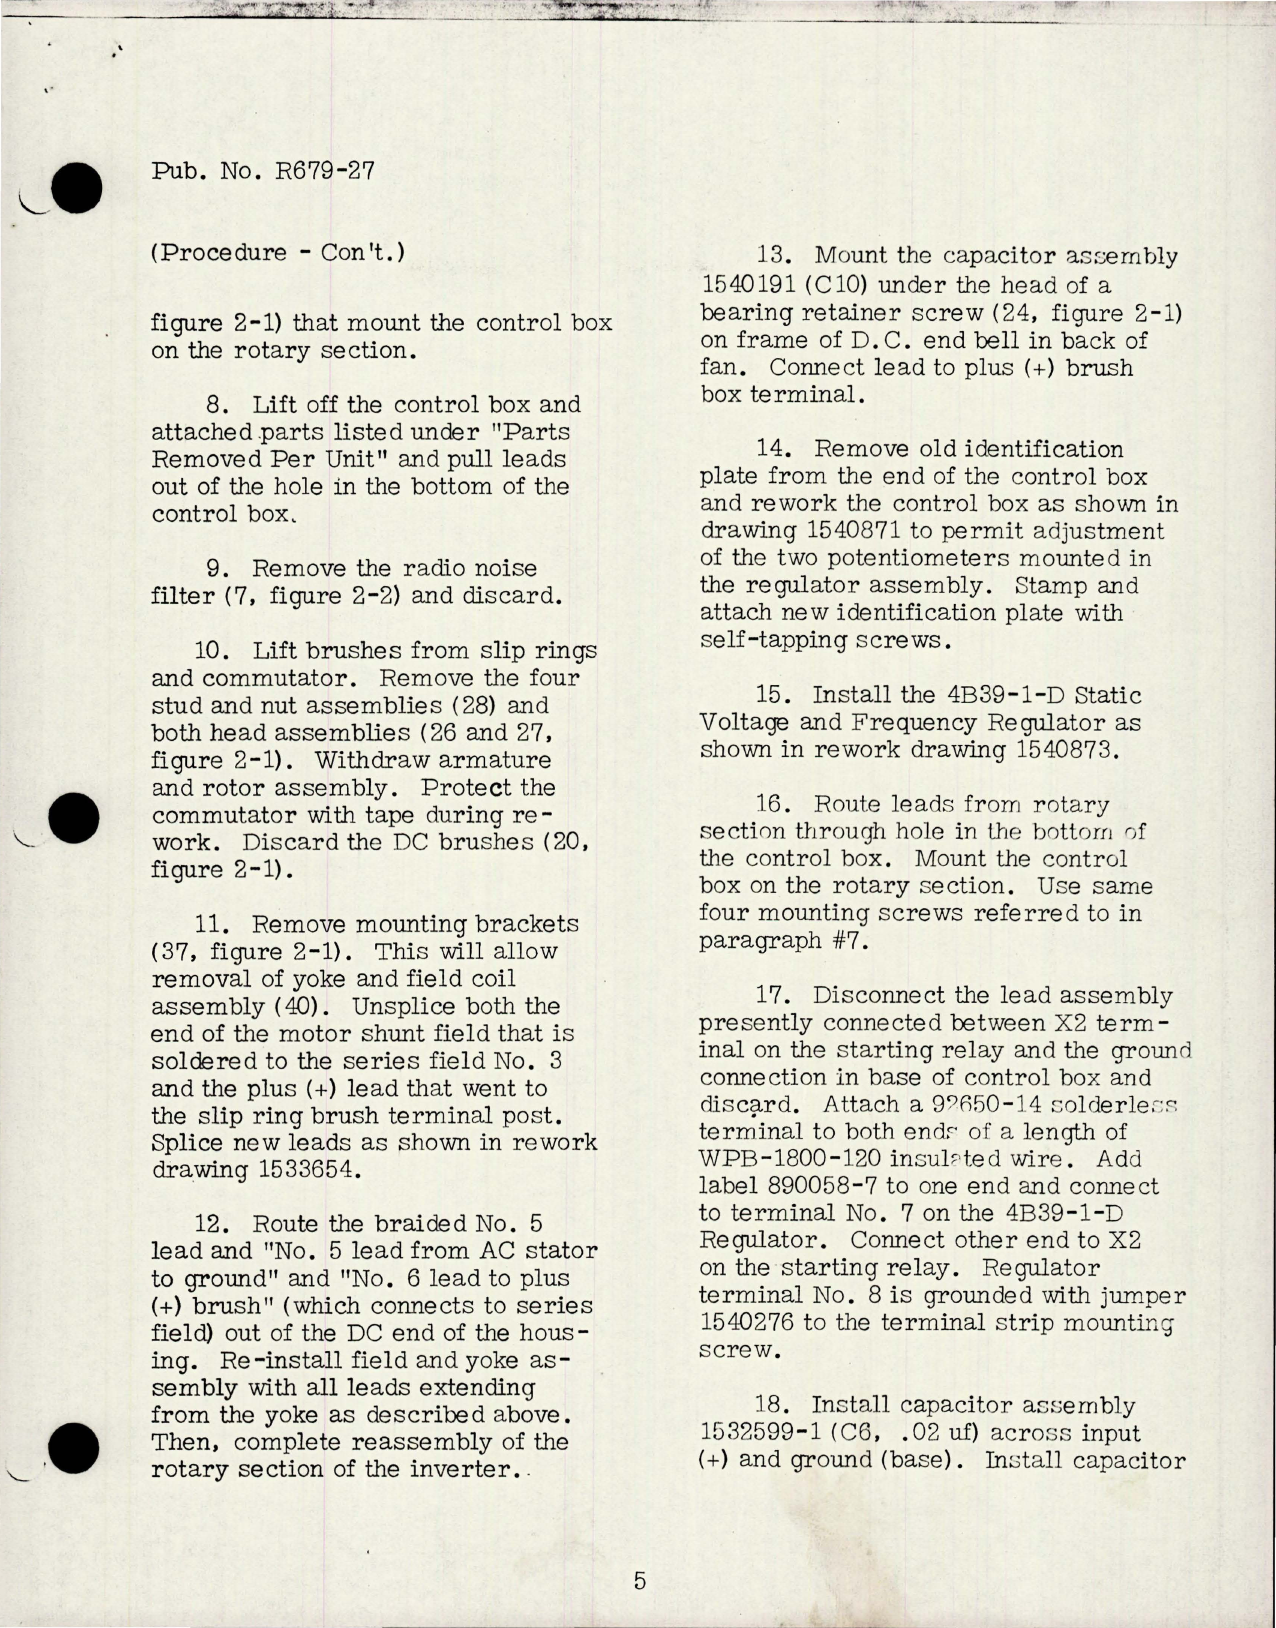 Sample page 5 from AirCorps Library document: Service Bulletin No. R-204, Installation of Static Voltage and Frequency Regulator Kit Type - 4B39-15-D